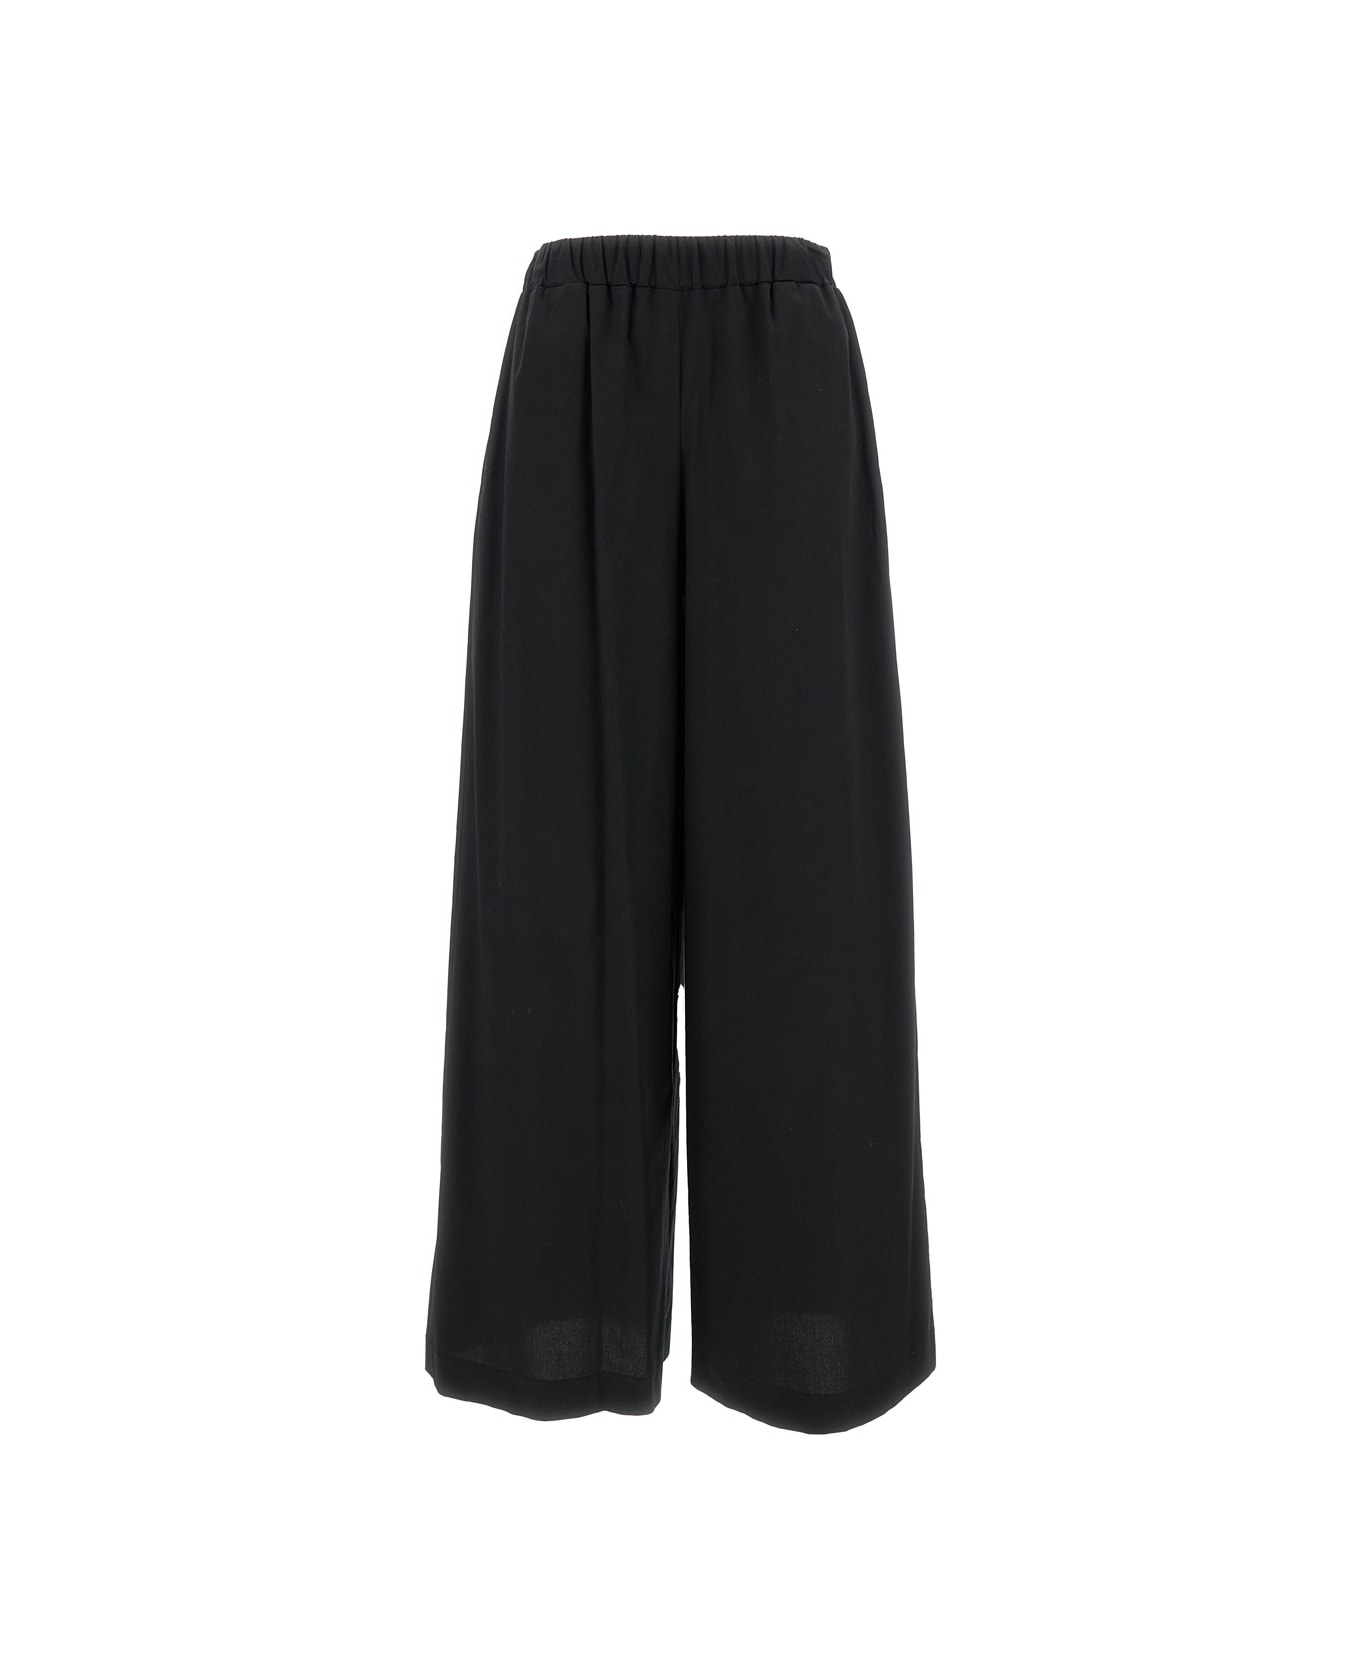 Federica Tosi Black Elastic High-waisted Pants In Stretch Cotton Woman - Black